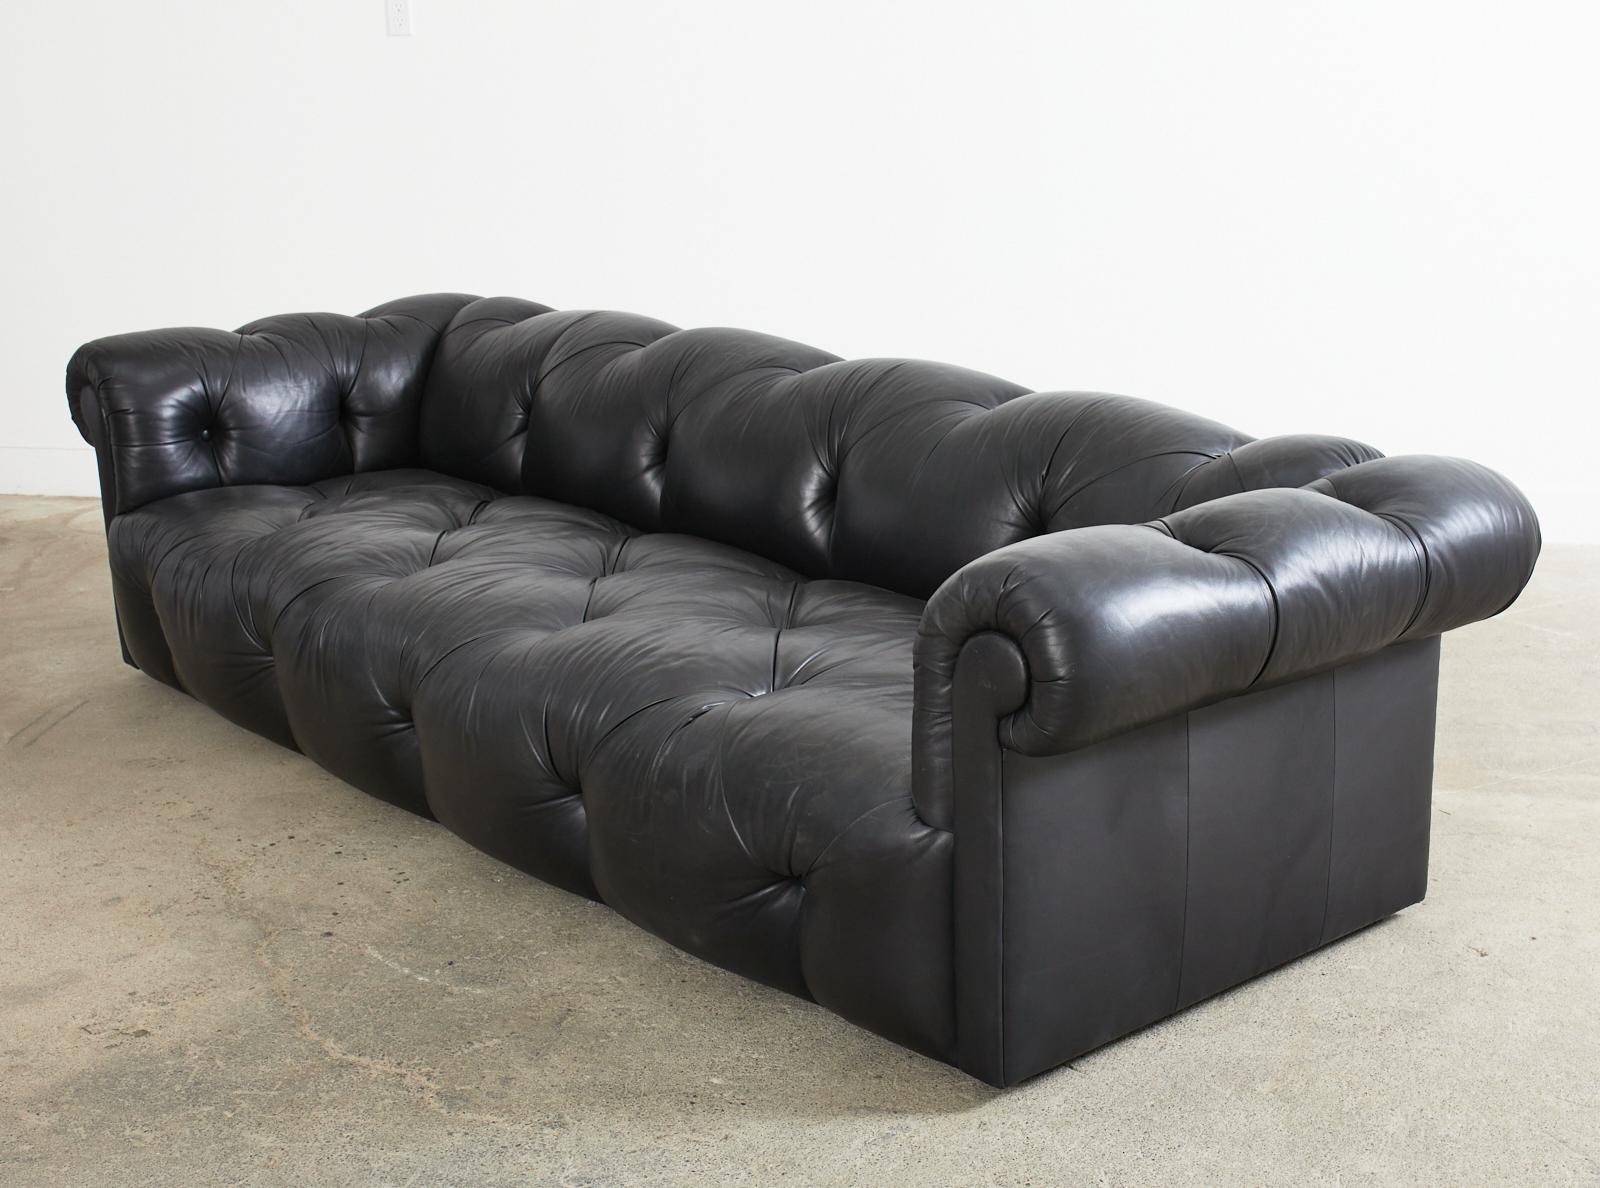 American Sally Sirkin Lewis Black Leather Chesterfield Tufted Sofa